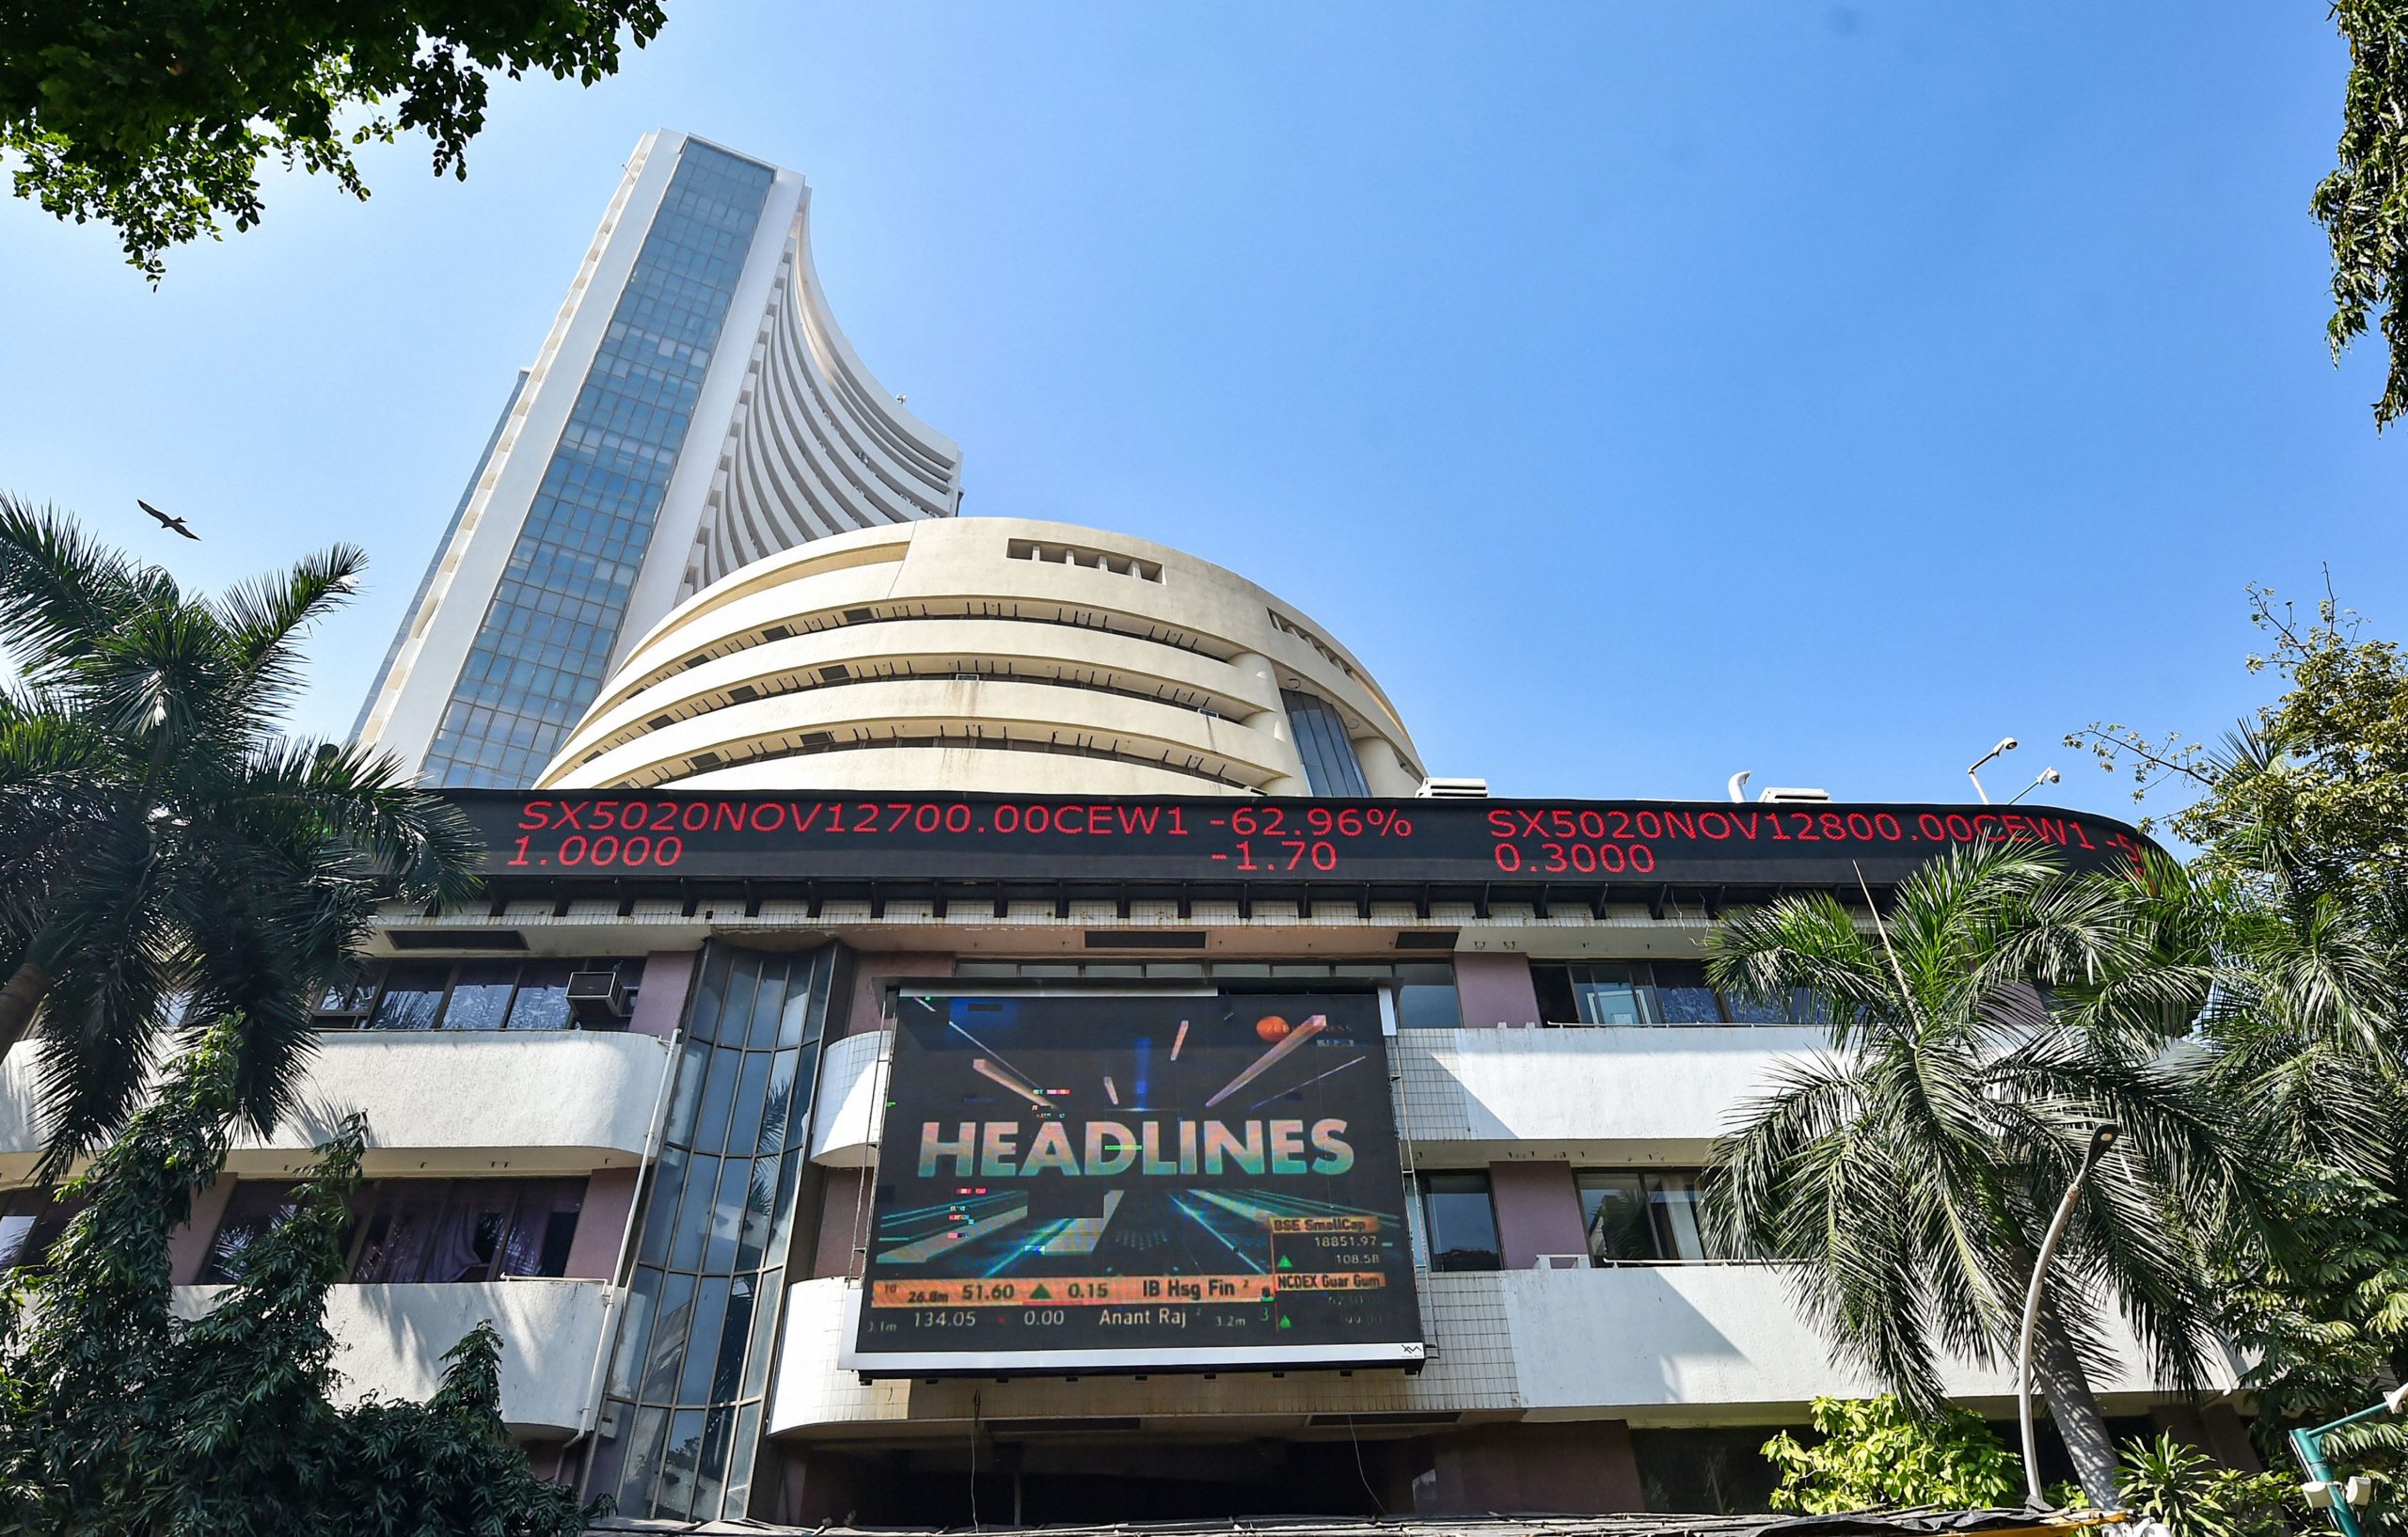 Trending Stocks: UltraTech, Bajaj Auto, Nykaa and others in news today